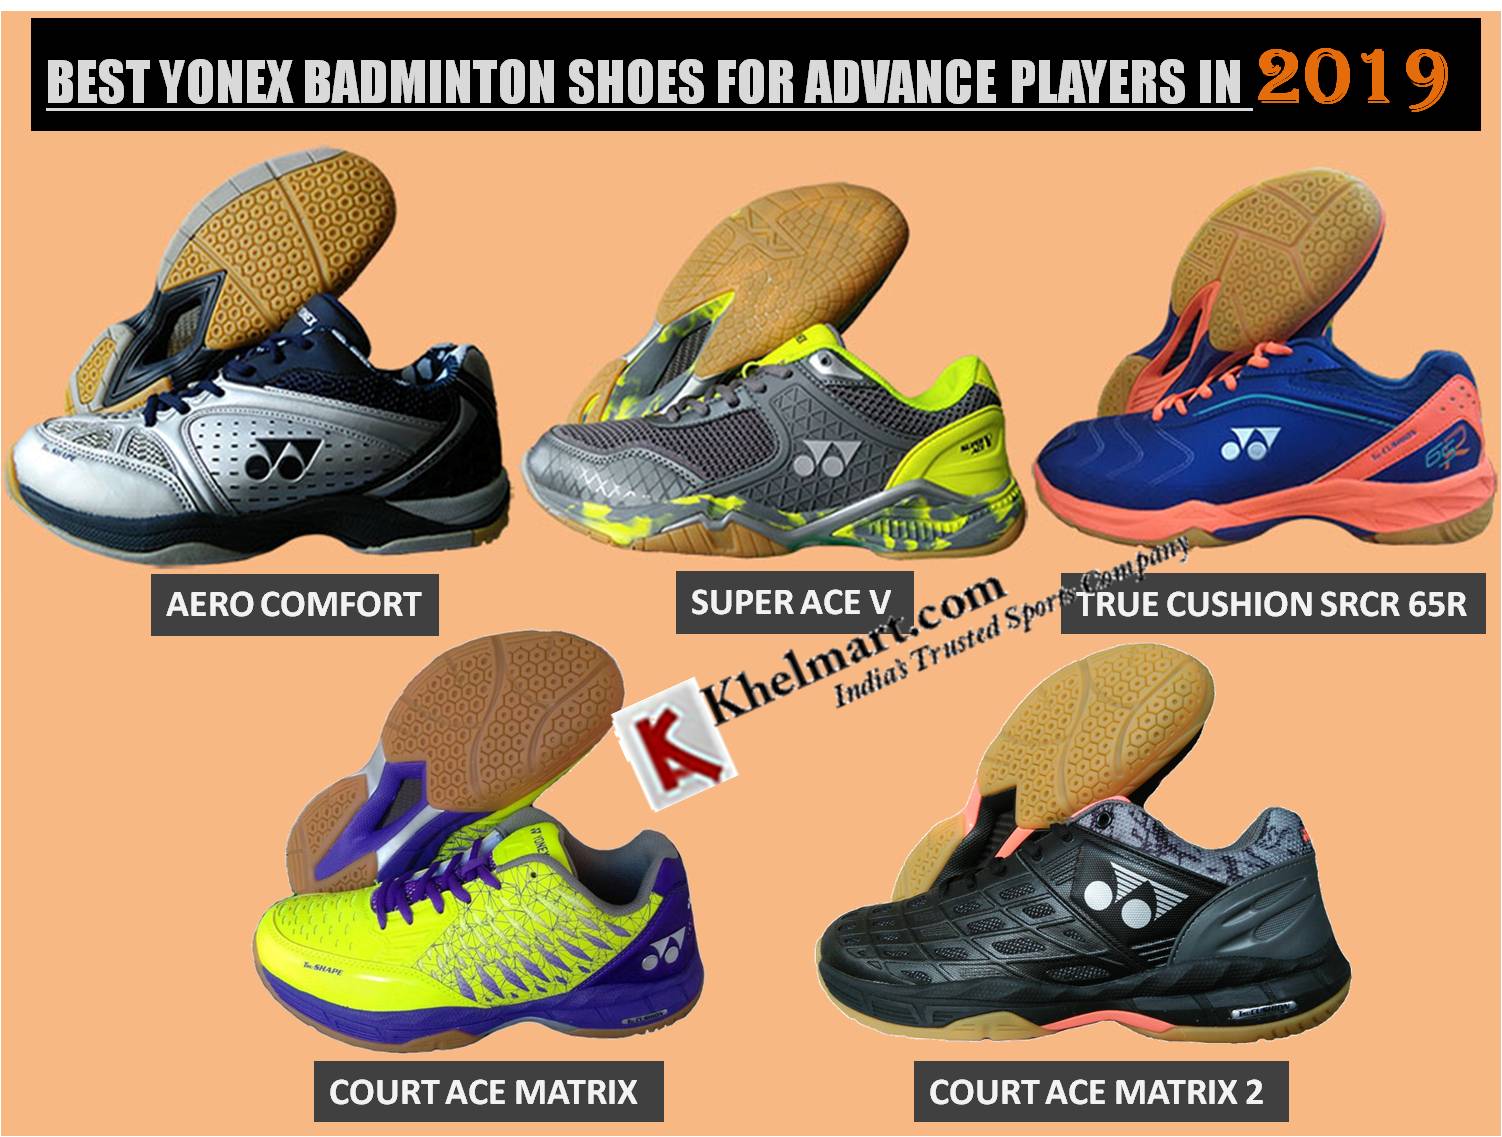 Best Yonex Badminton shoes for advance players in 2019.jpg